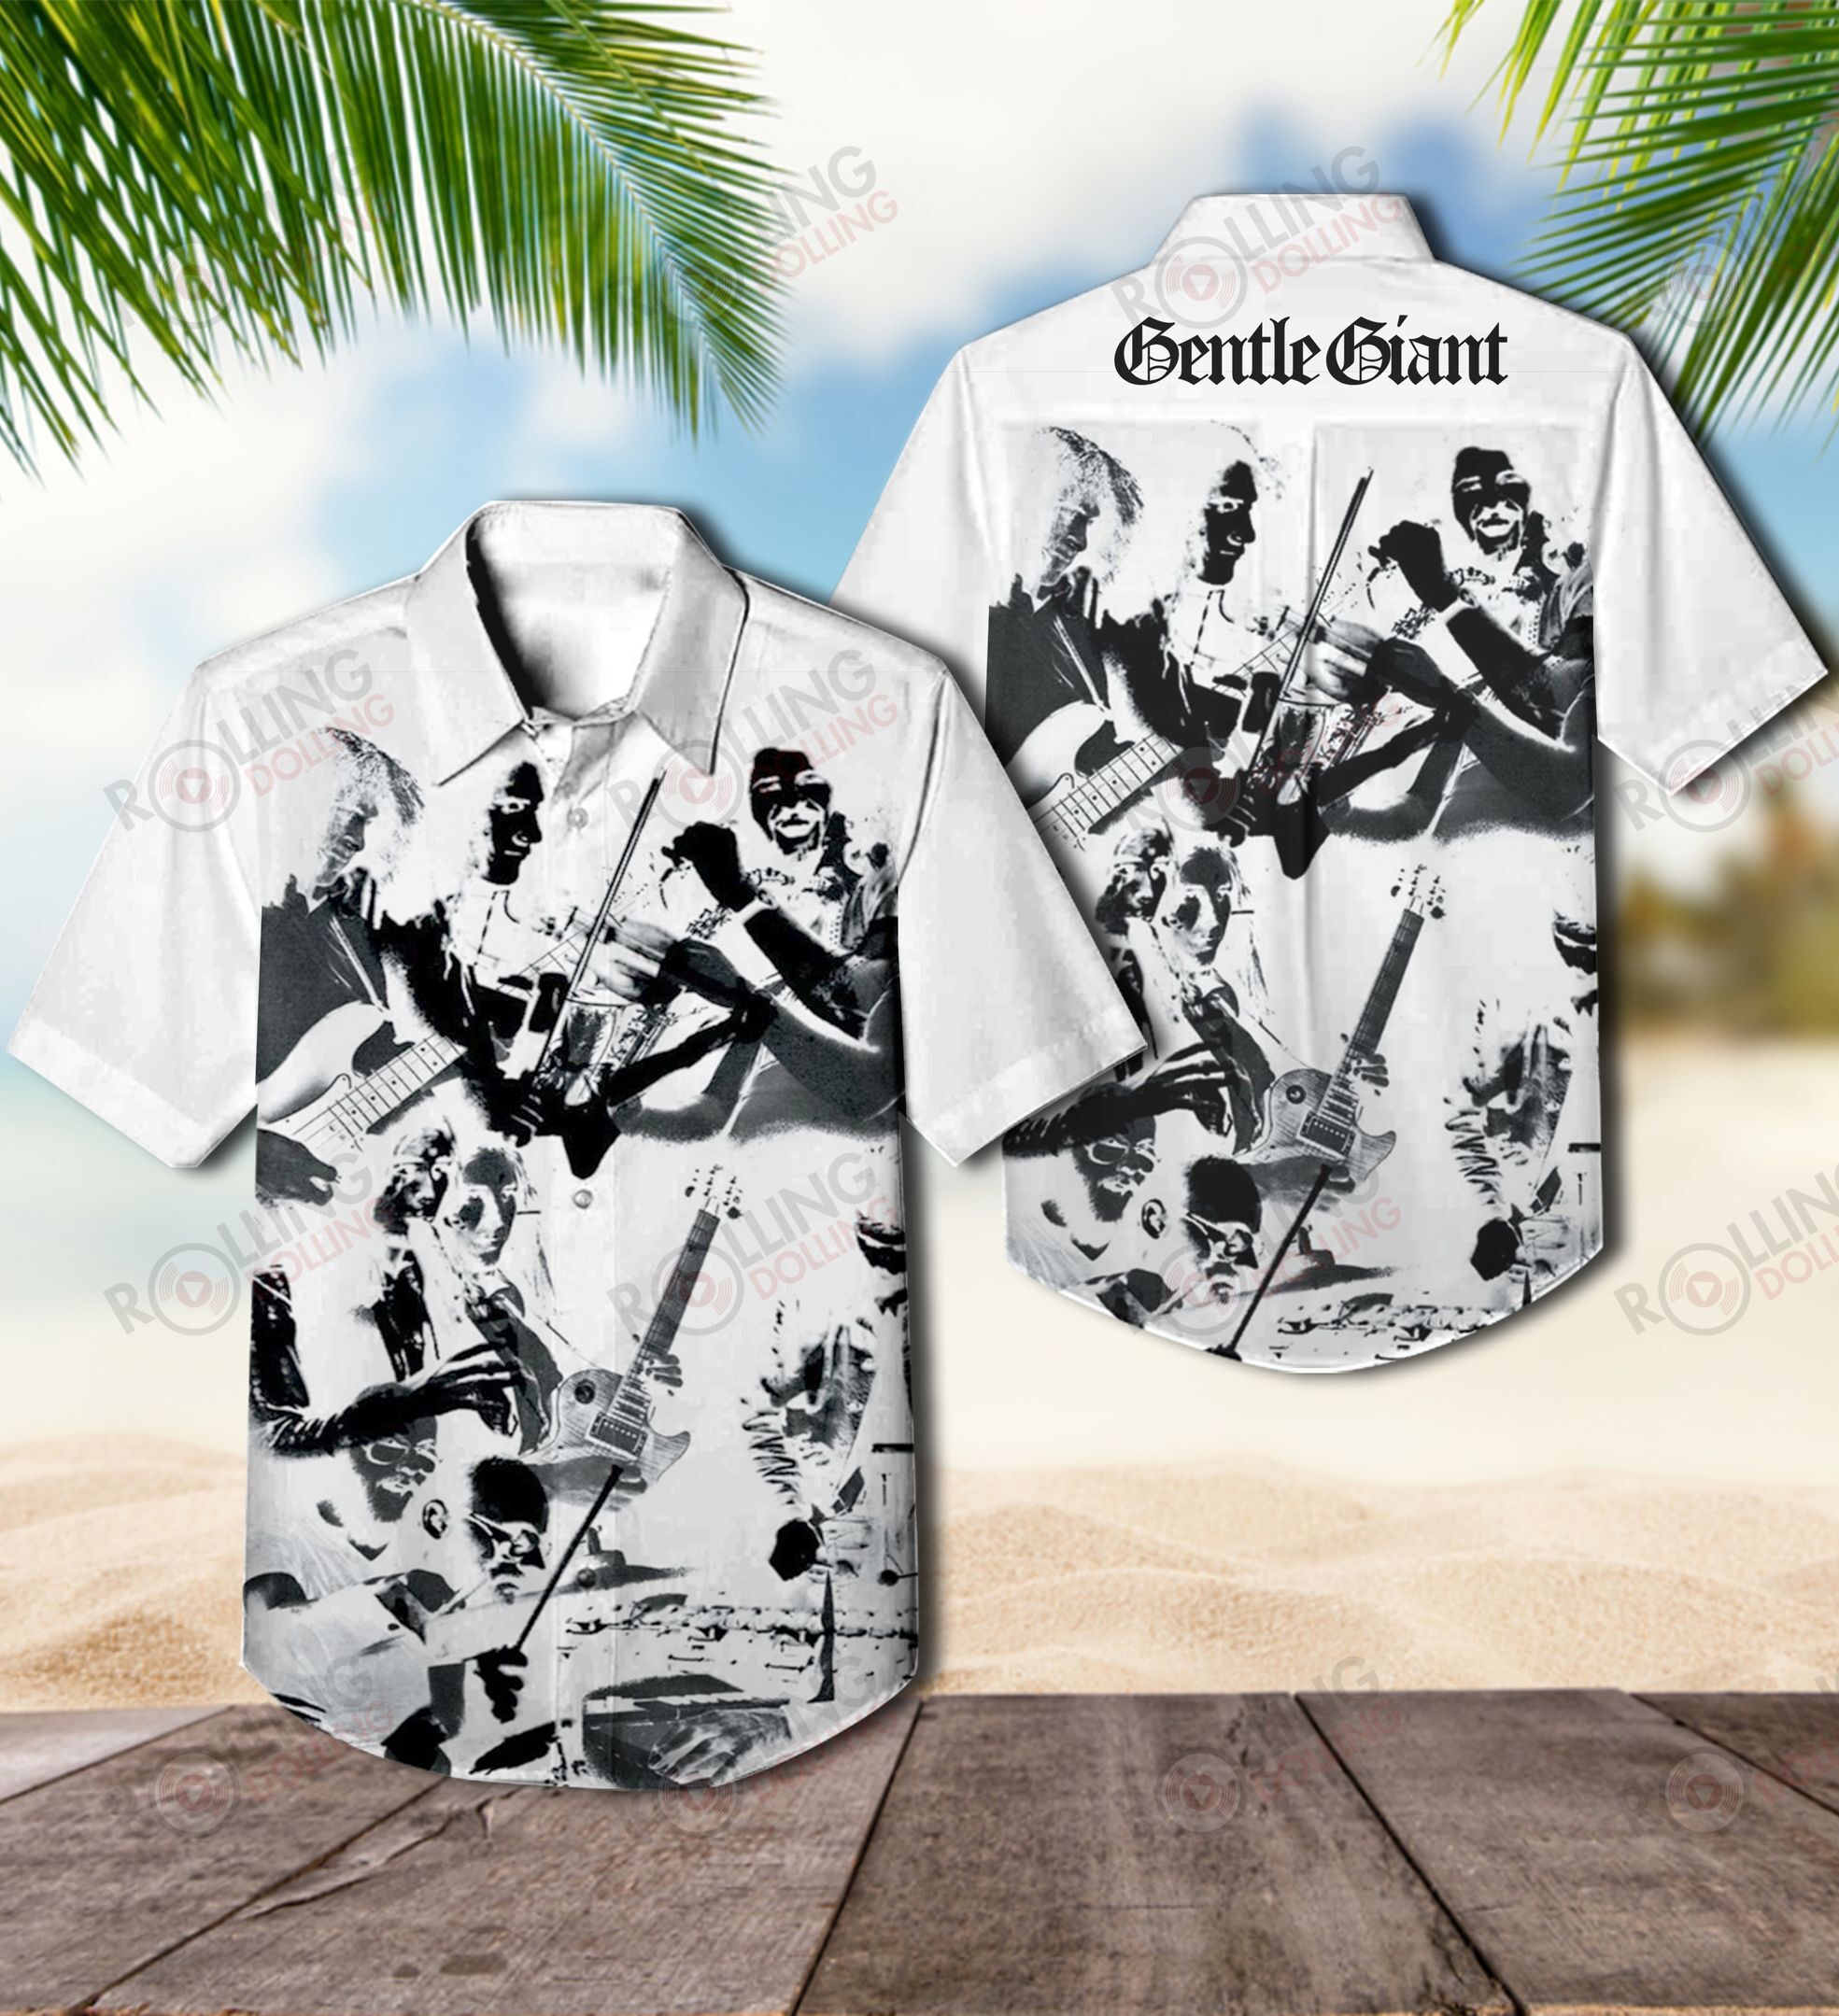 For summer, consider wearing This Amazing Hawaiian Shirt shirt in our store 70